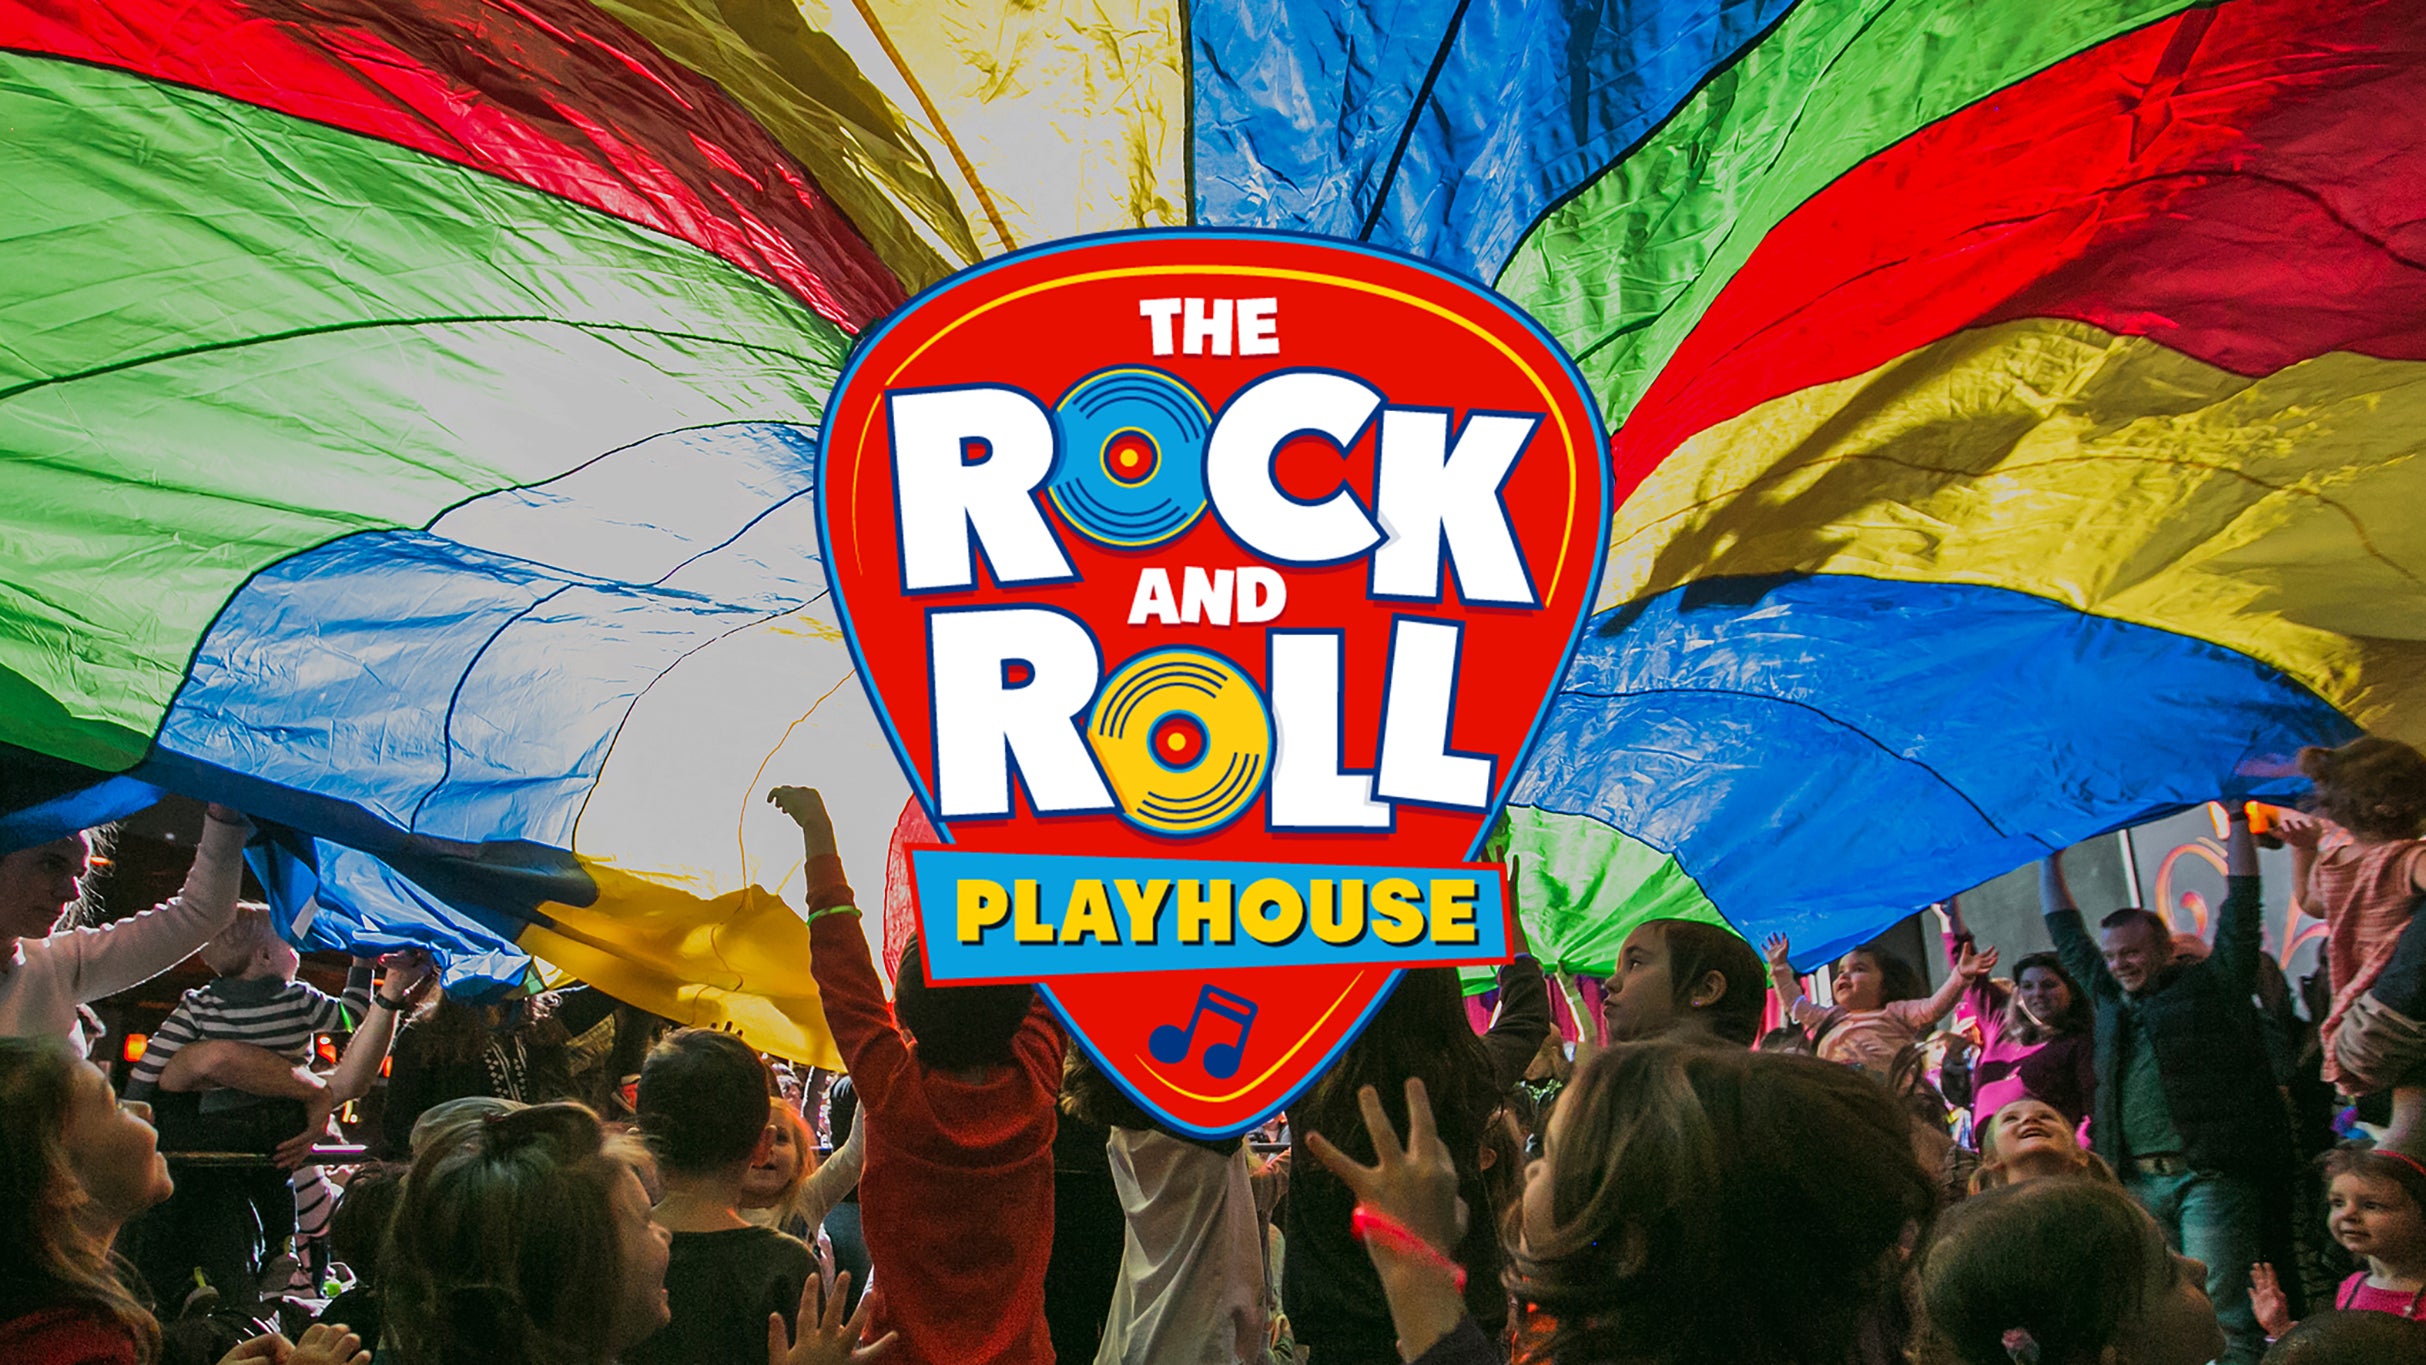 Rock And Roll Playhouse Plays Music Of Grateful Dead + More For Kids presale password